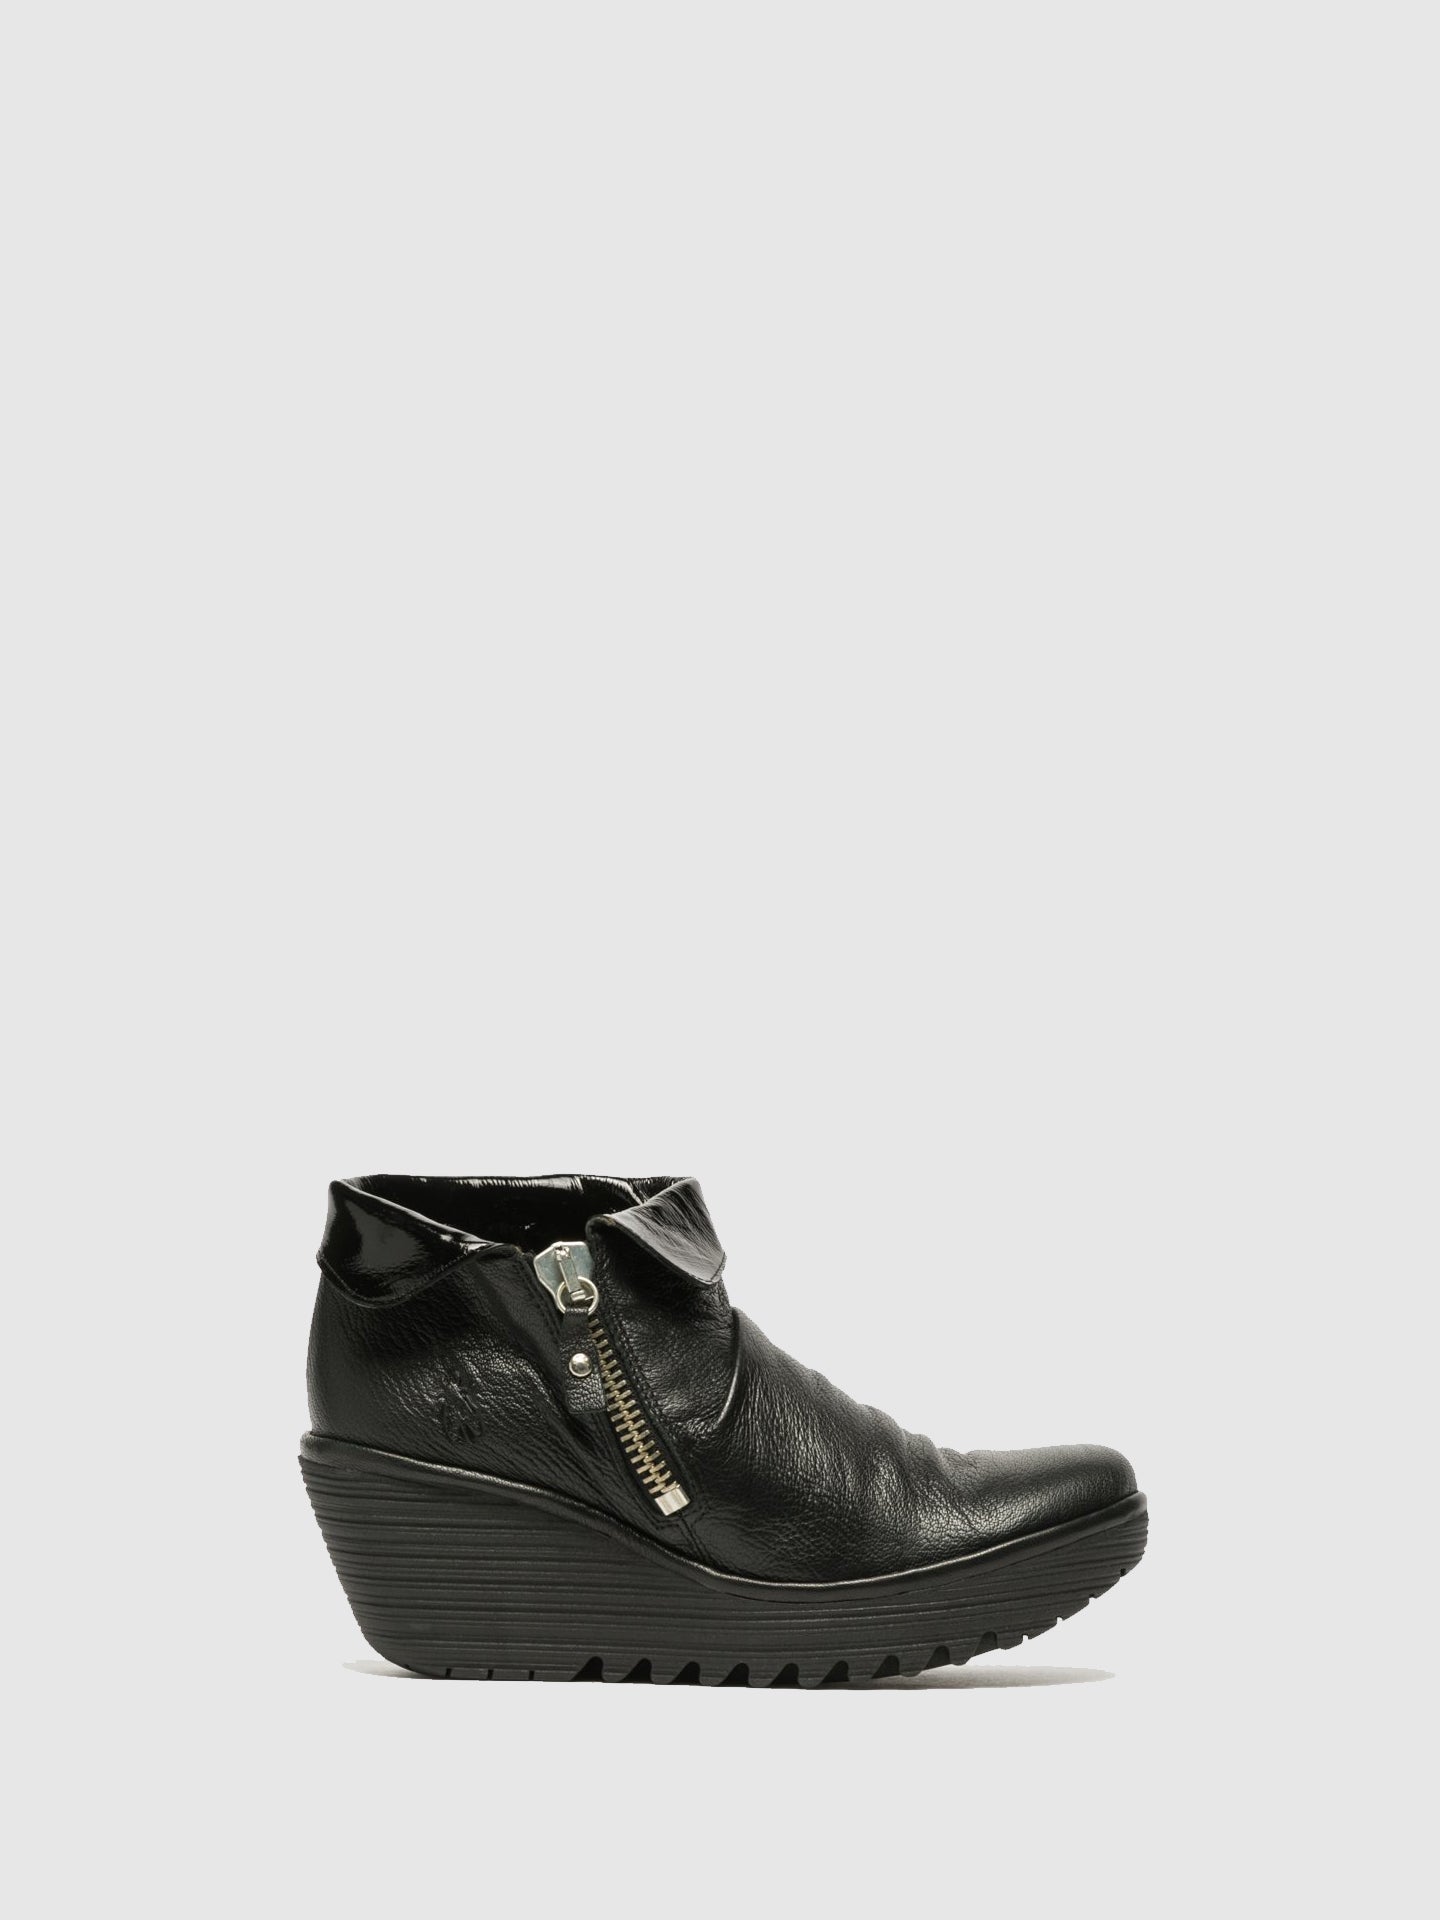 Fly London Carbon Black Zip Up Ankle Boots